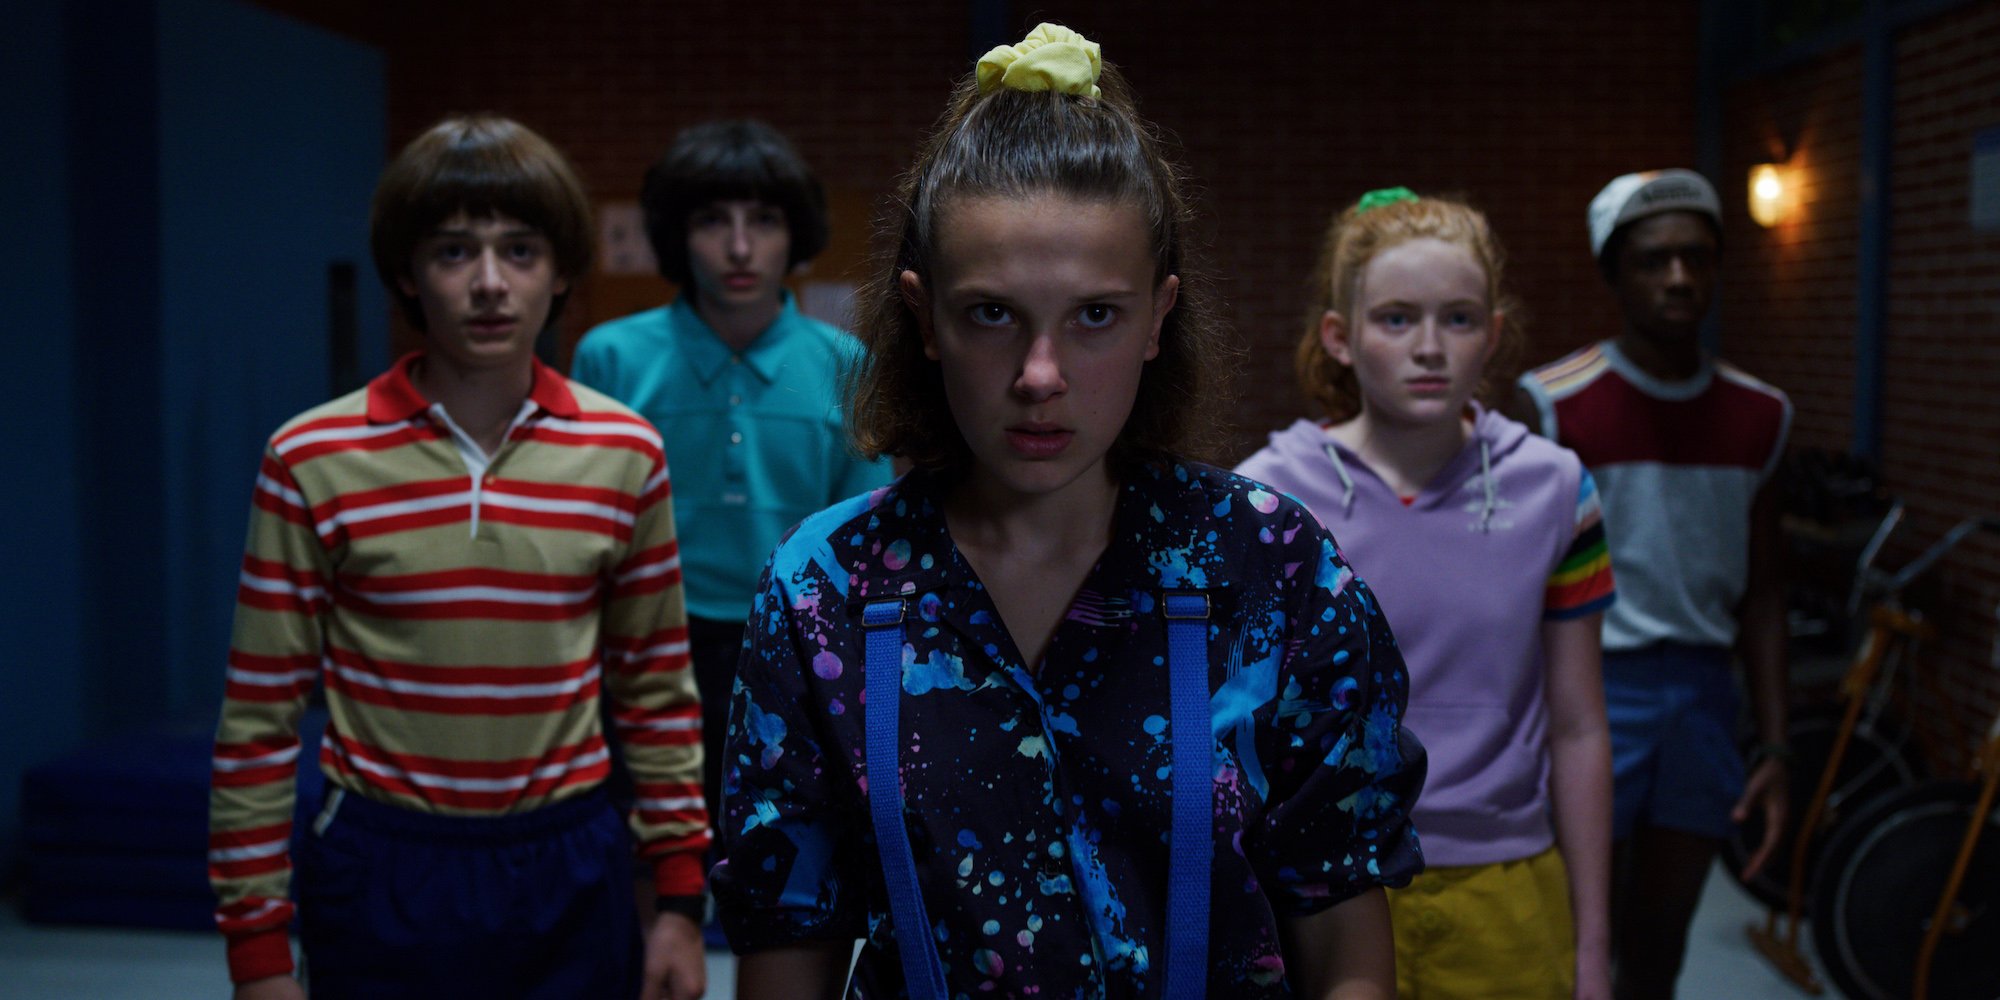 Our 'Stranger Things' Season 3 recap features Eleven and the gang trapping Billy in a sauna as seen here in this production still from the series.